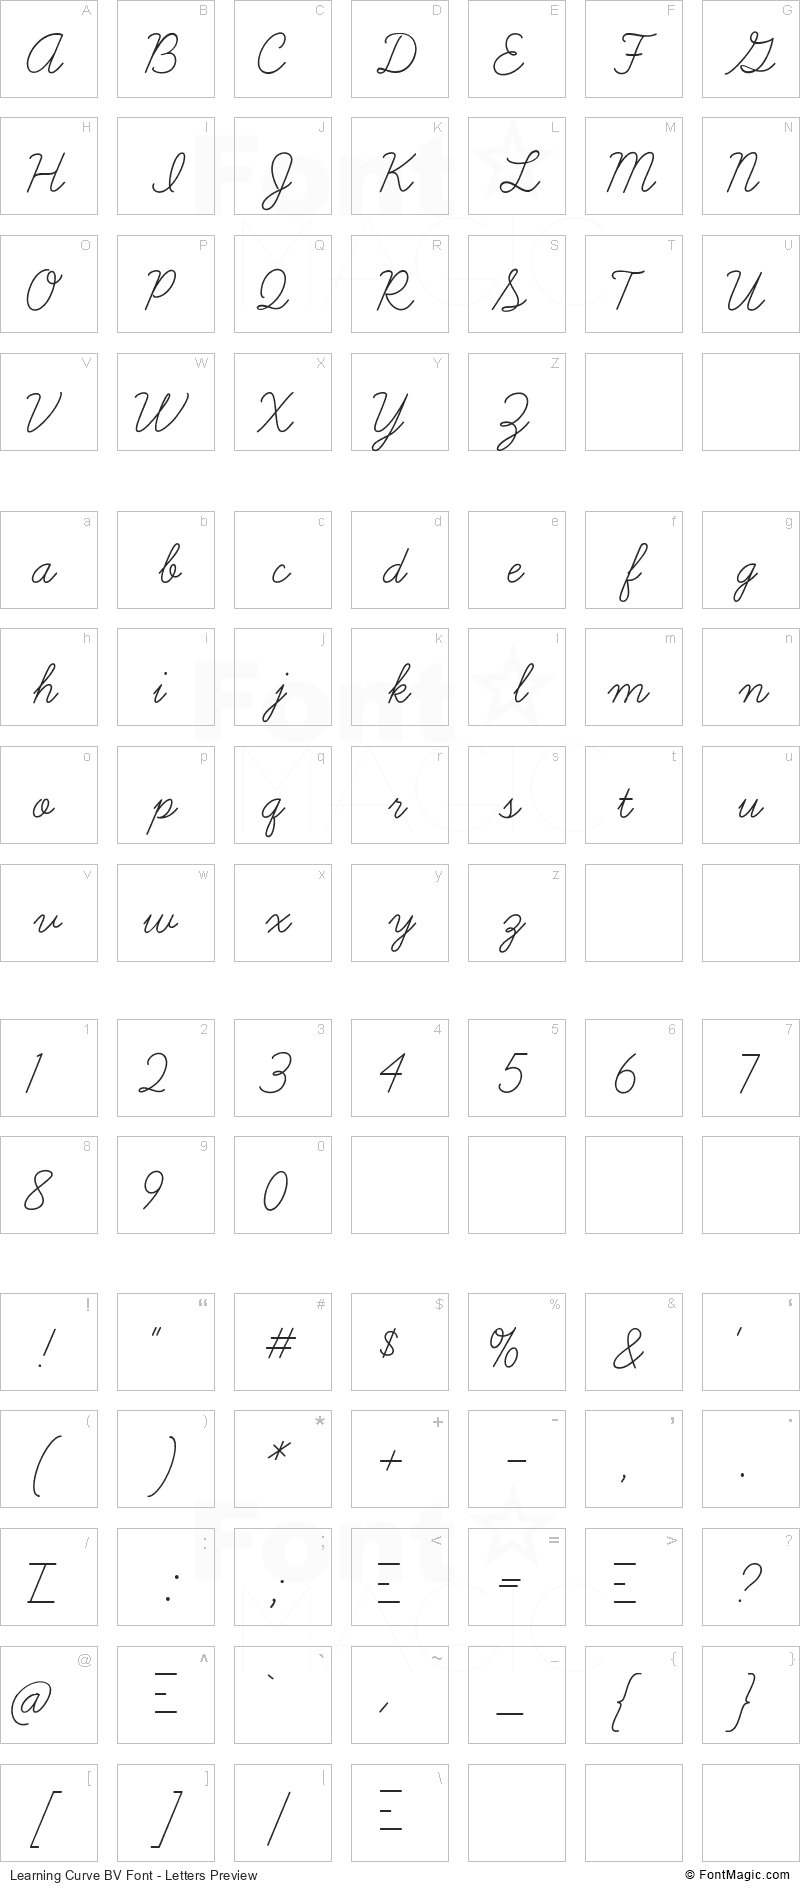 Learning Curve BV Font - All Latters Preview Chart